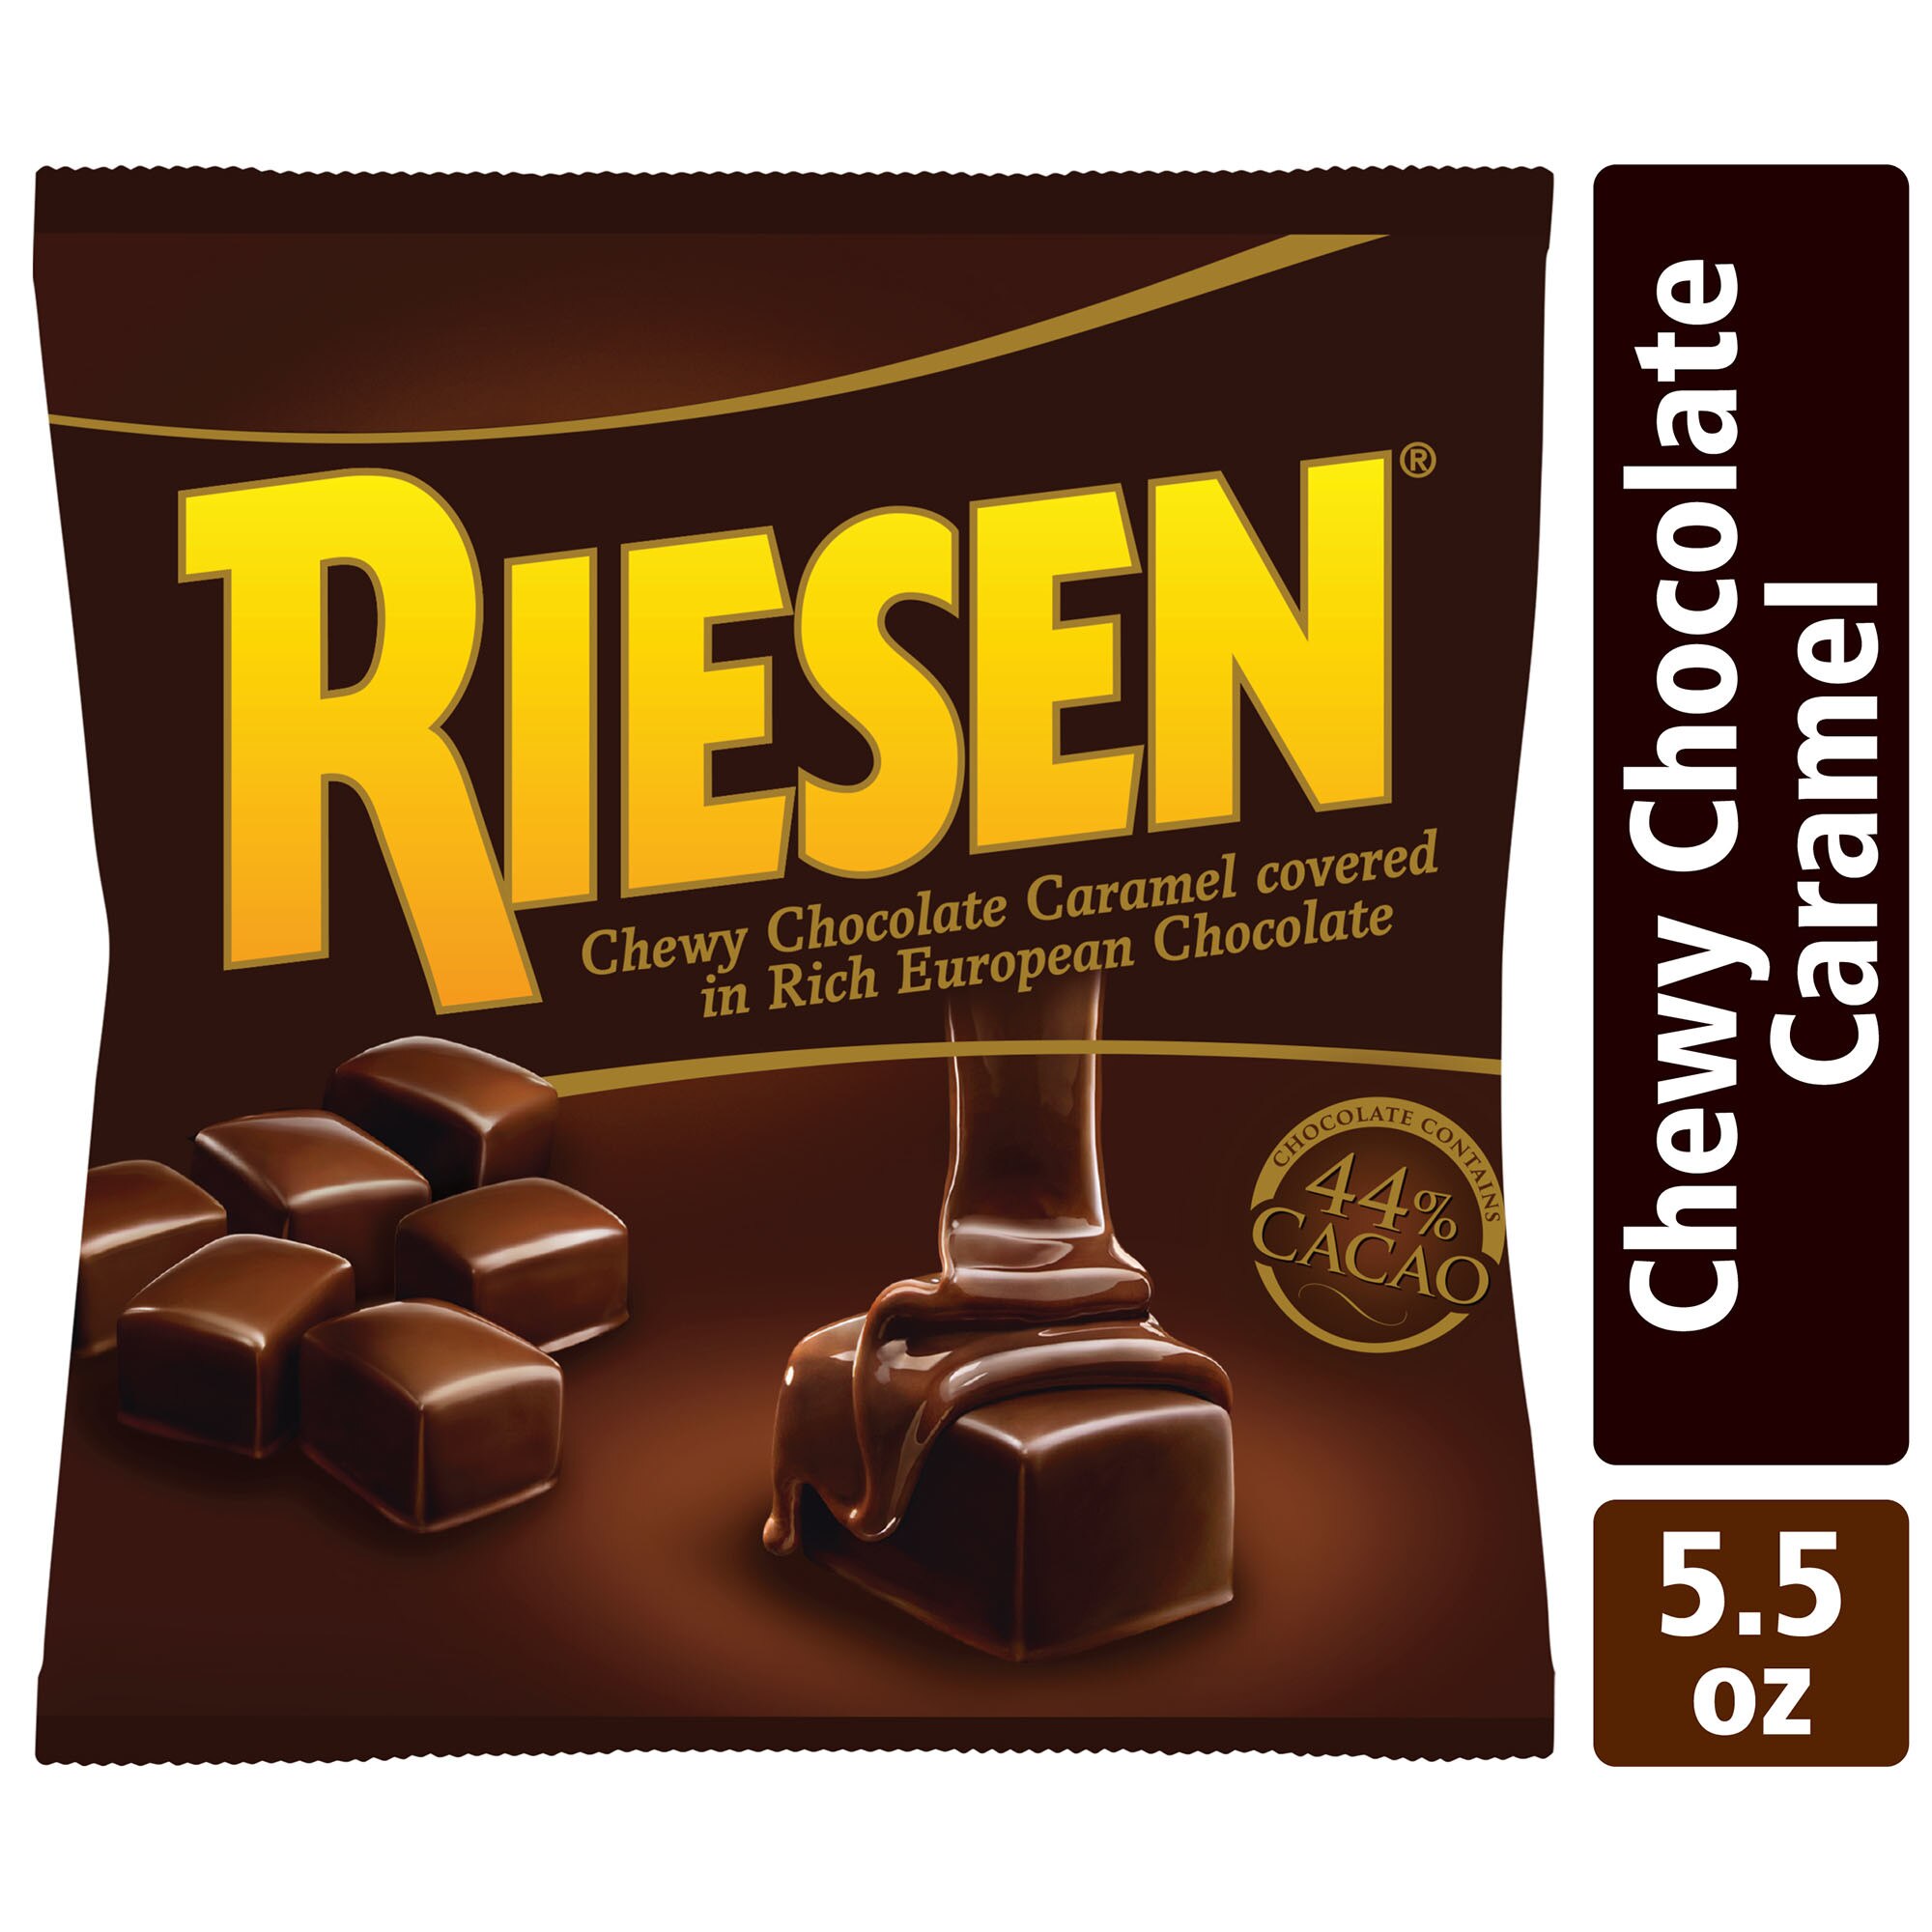 Riesen Chocolate Covered Chewy Caramel Candy, 5.5 oz